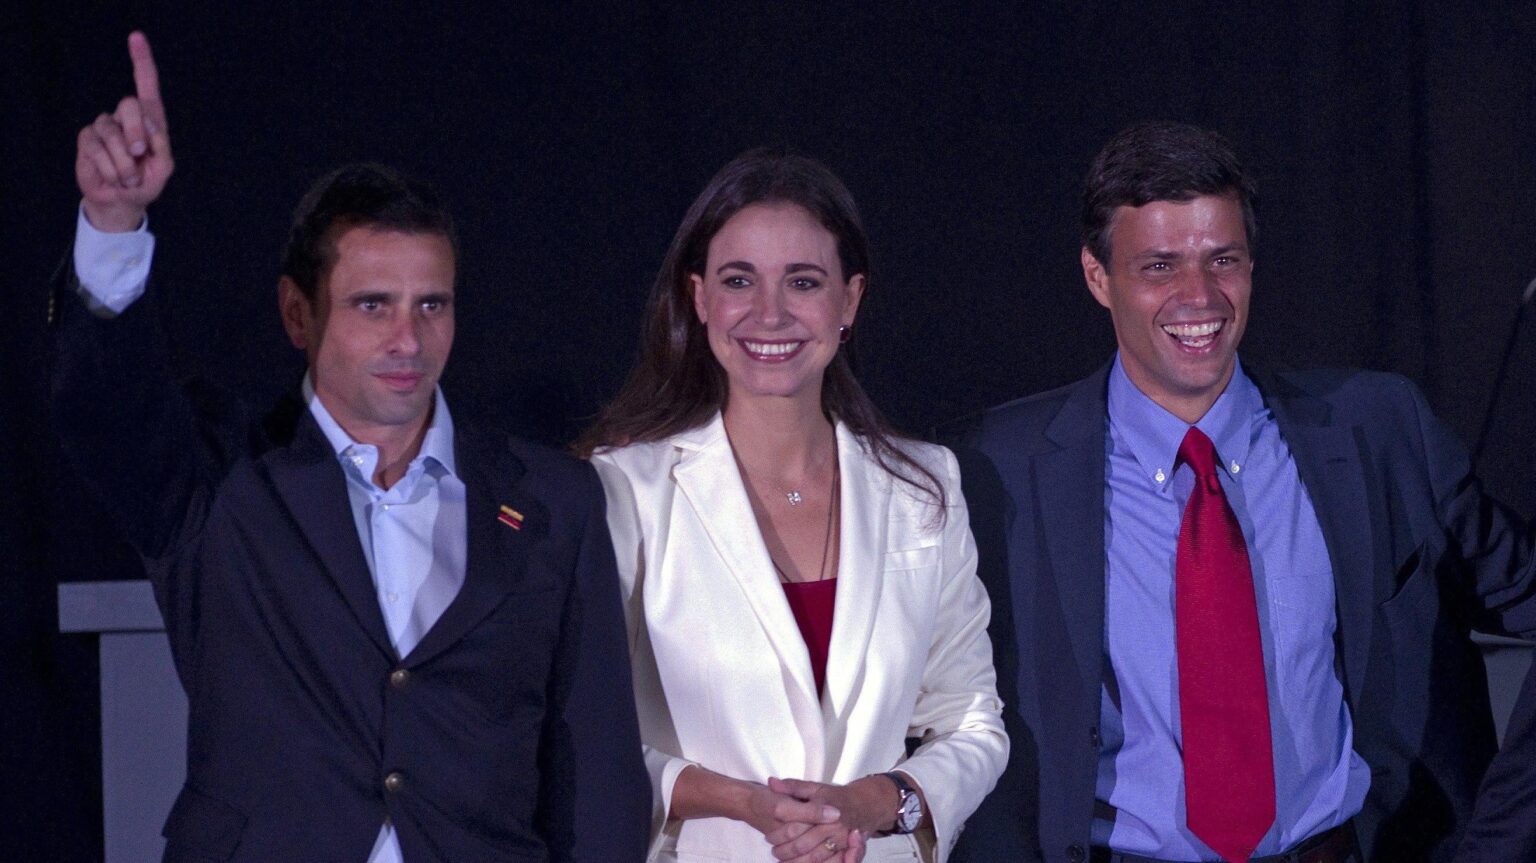 A photo from early 2000s showing Venezuelan far-right politicians María Corina Machado (center) accompanied by Henrique Capriles (left) and Leopoldo López (right). Photo: Getty Images/File photo.